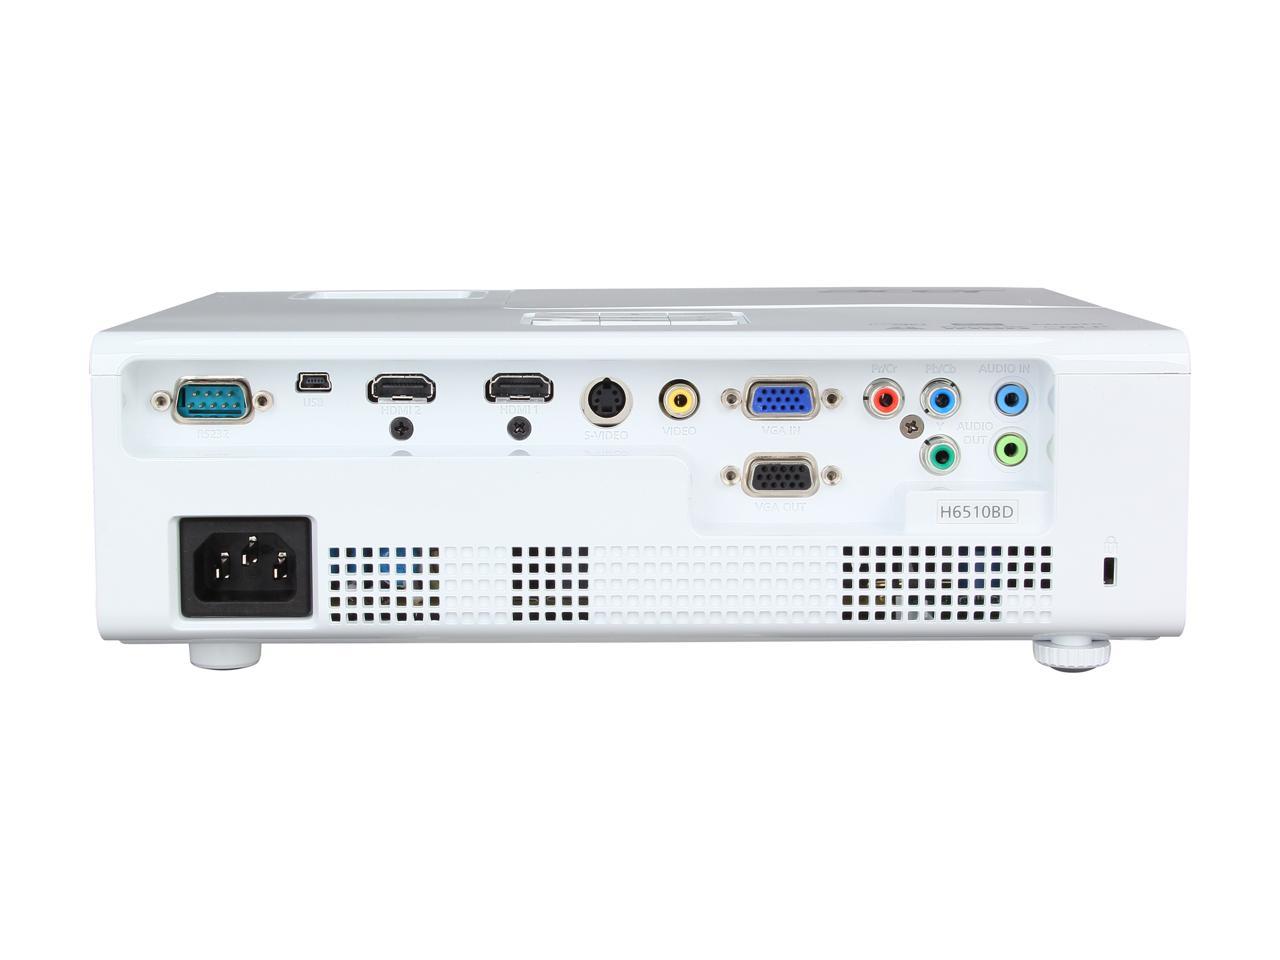 Acer H6510BD Full-HD Projector